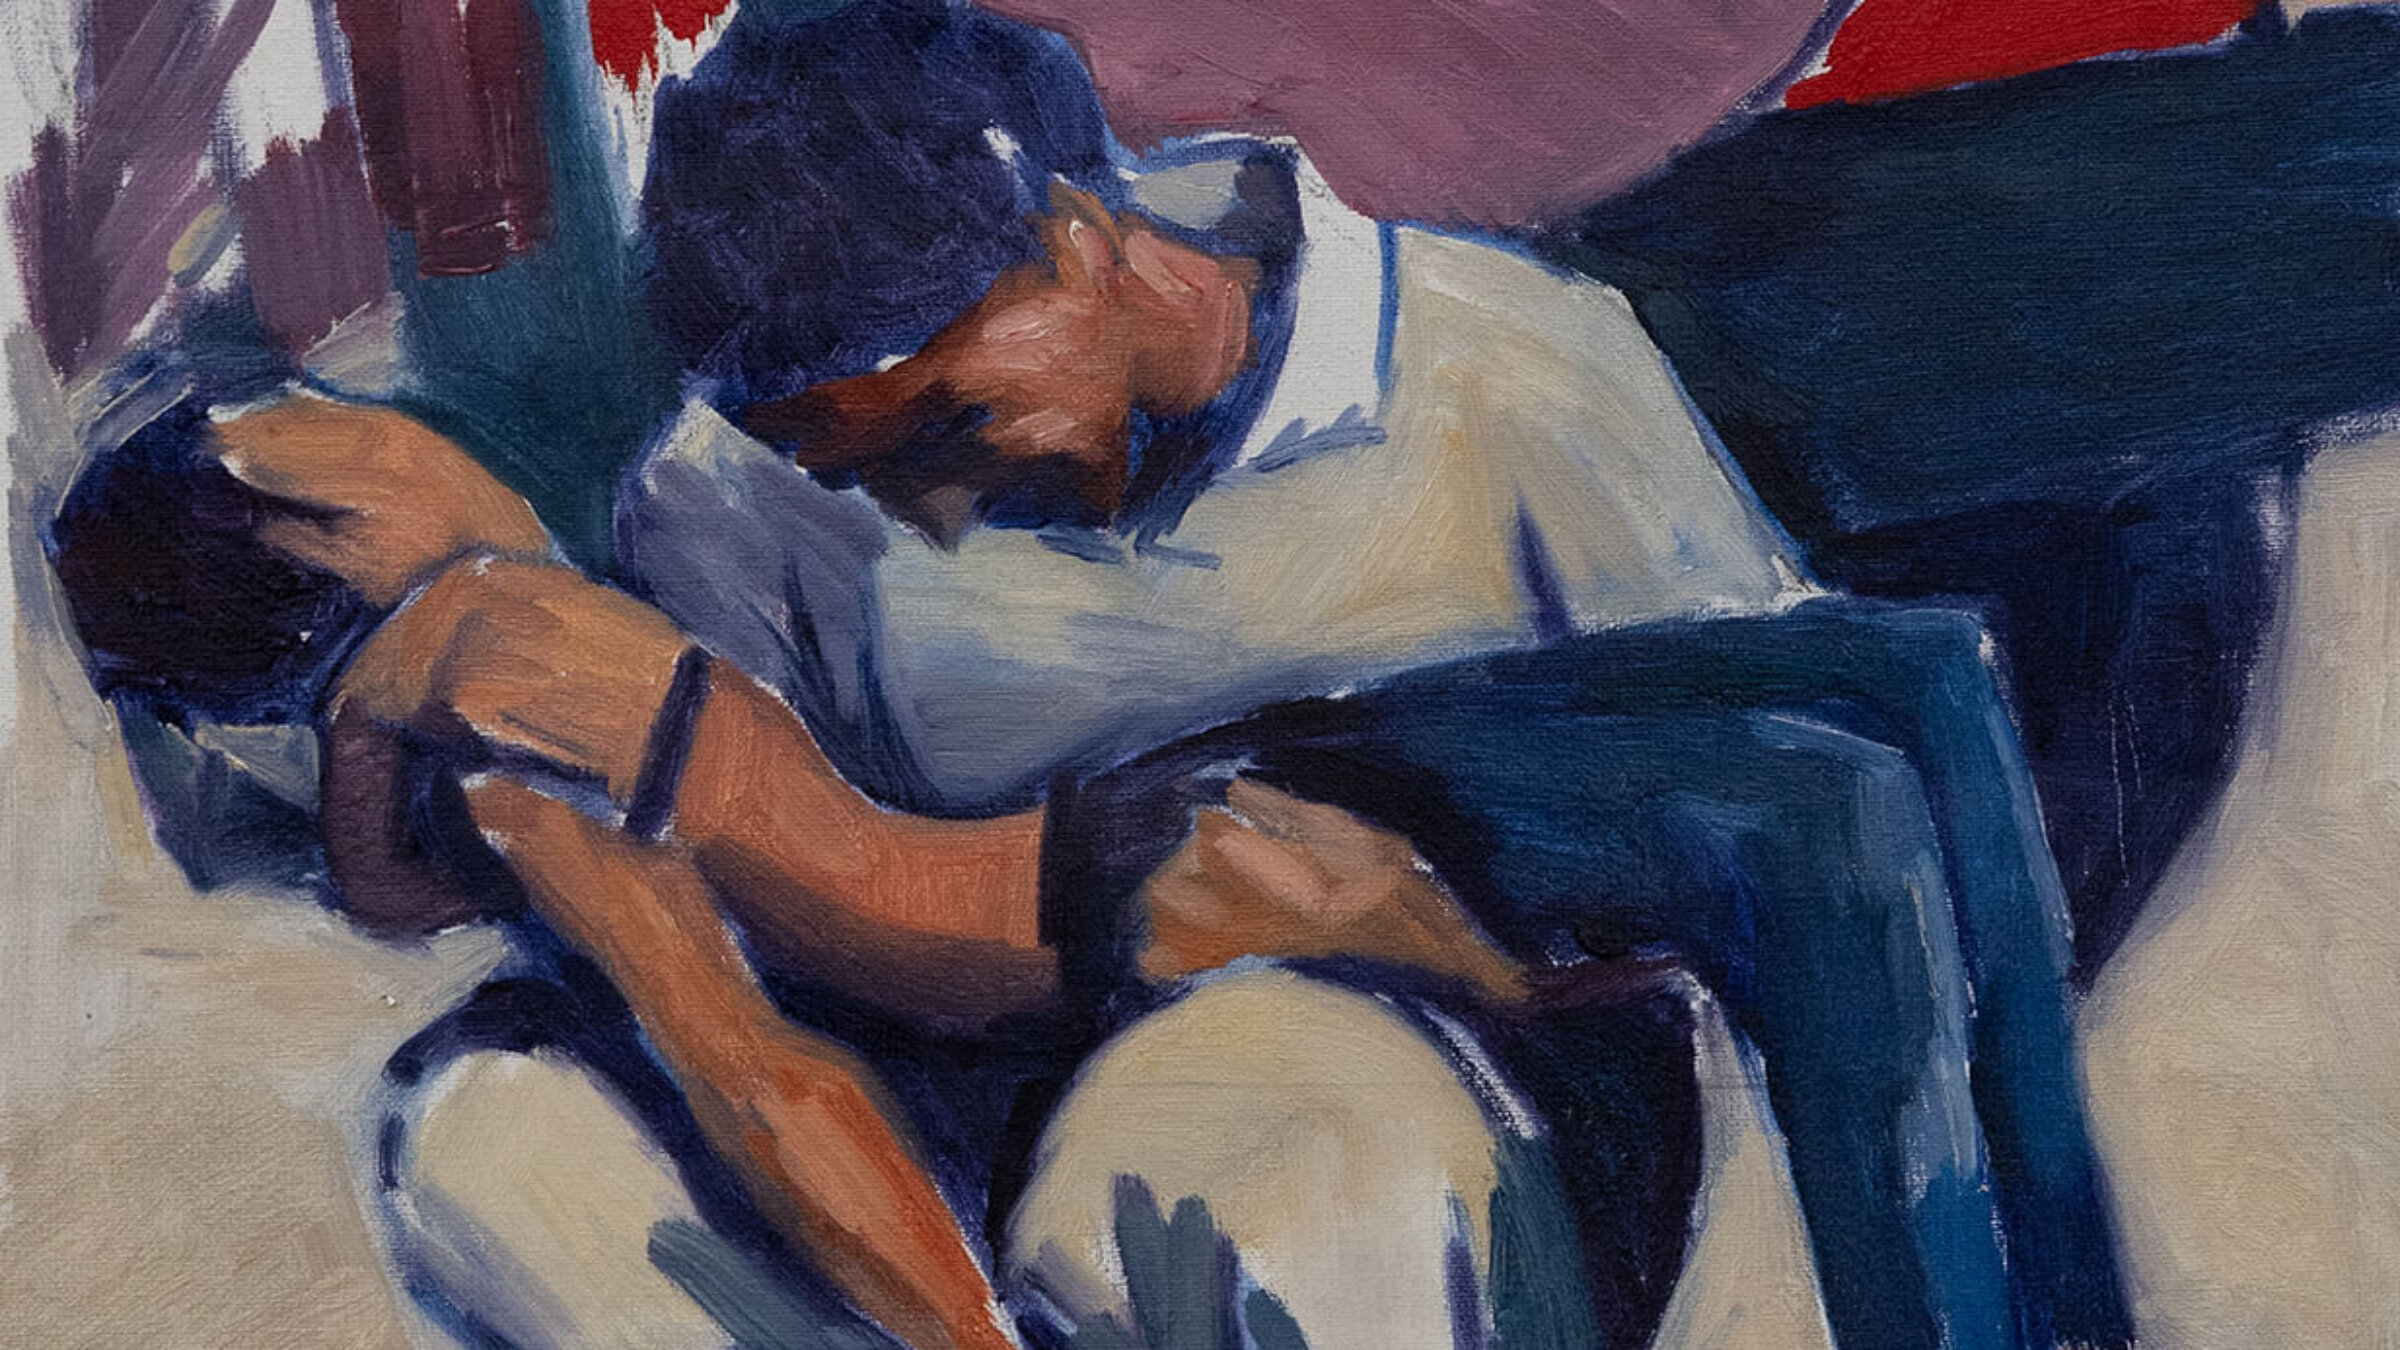 Ariel Asseo's painting of a father cradling his dead son is featured in an Israeli art exhibition about war's impact on children. He hopes it will prompt conversations about Israel's war in Gaza and policies in the occupied West Bank.